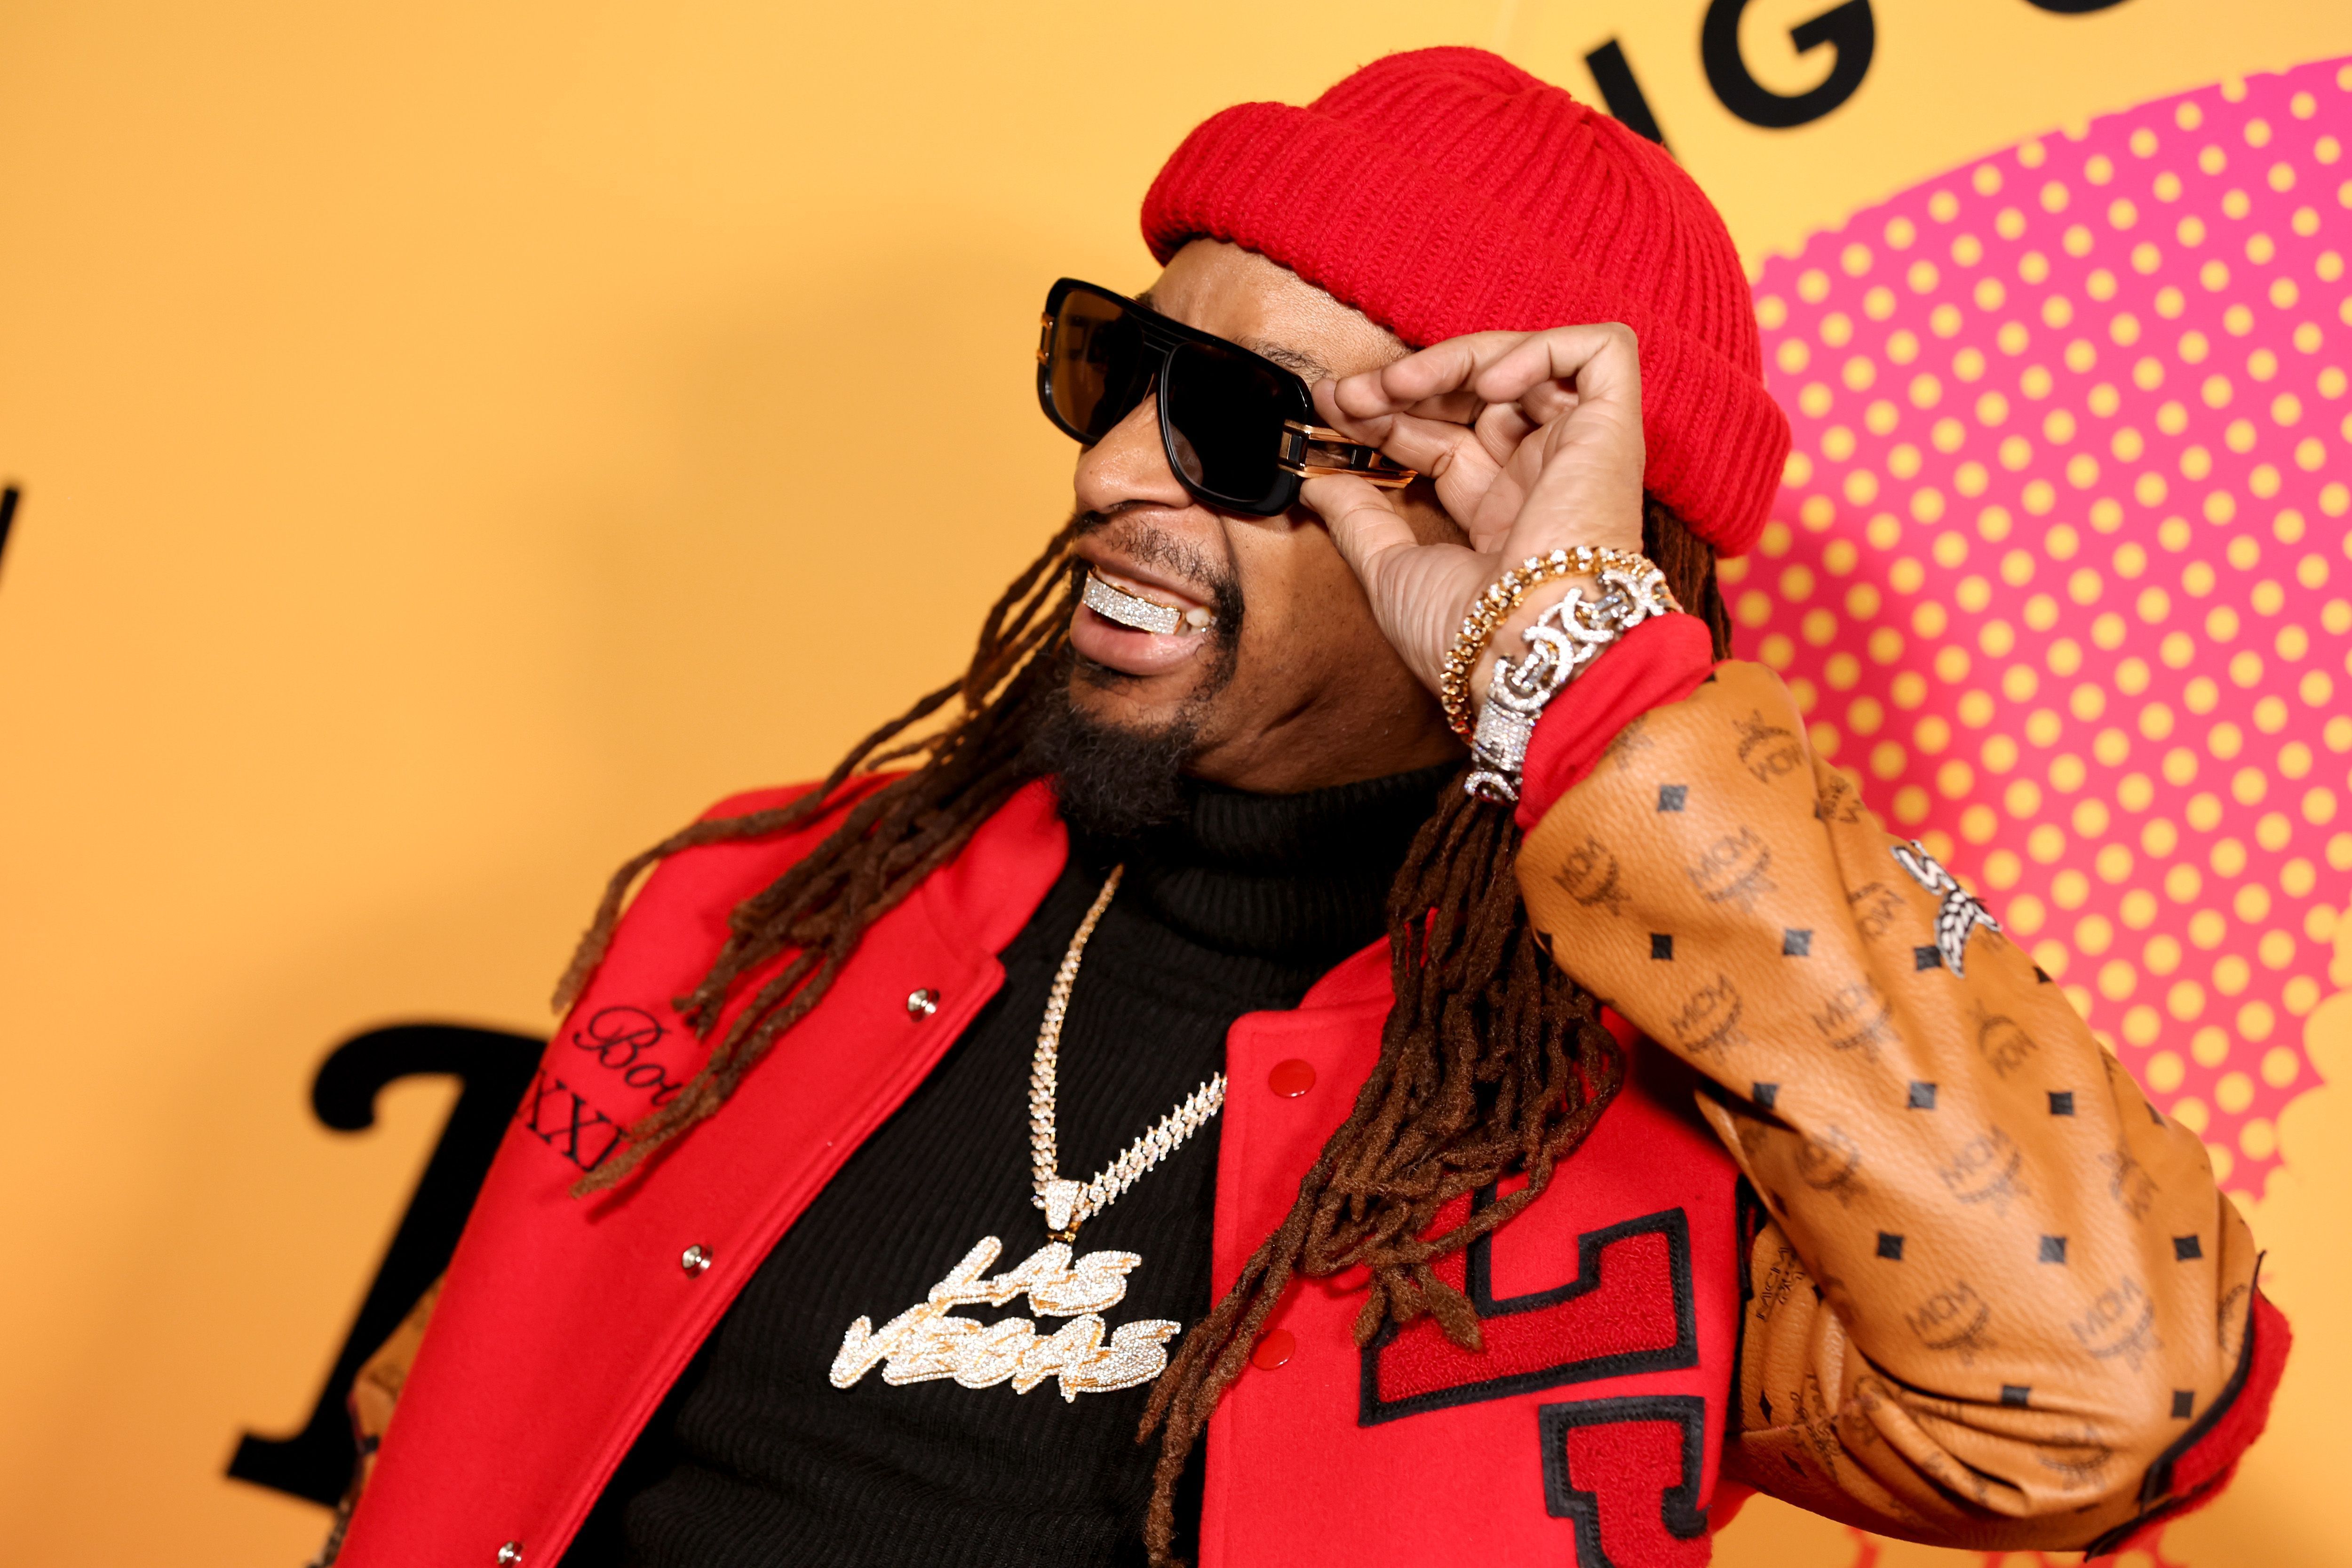 Rapper Lil Jon to release guided meditation album, but what is the practice?